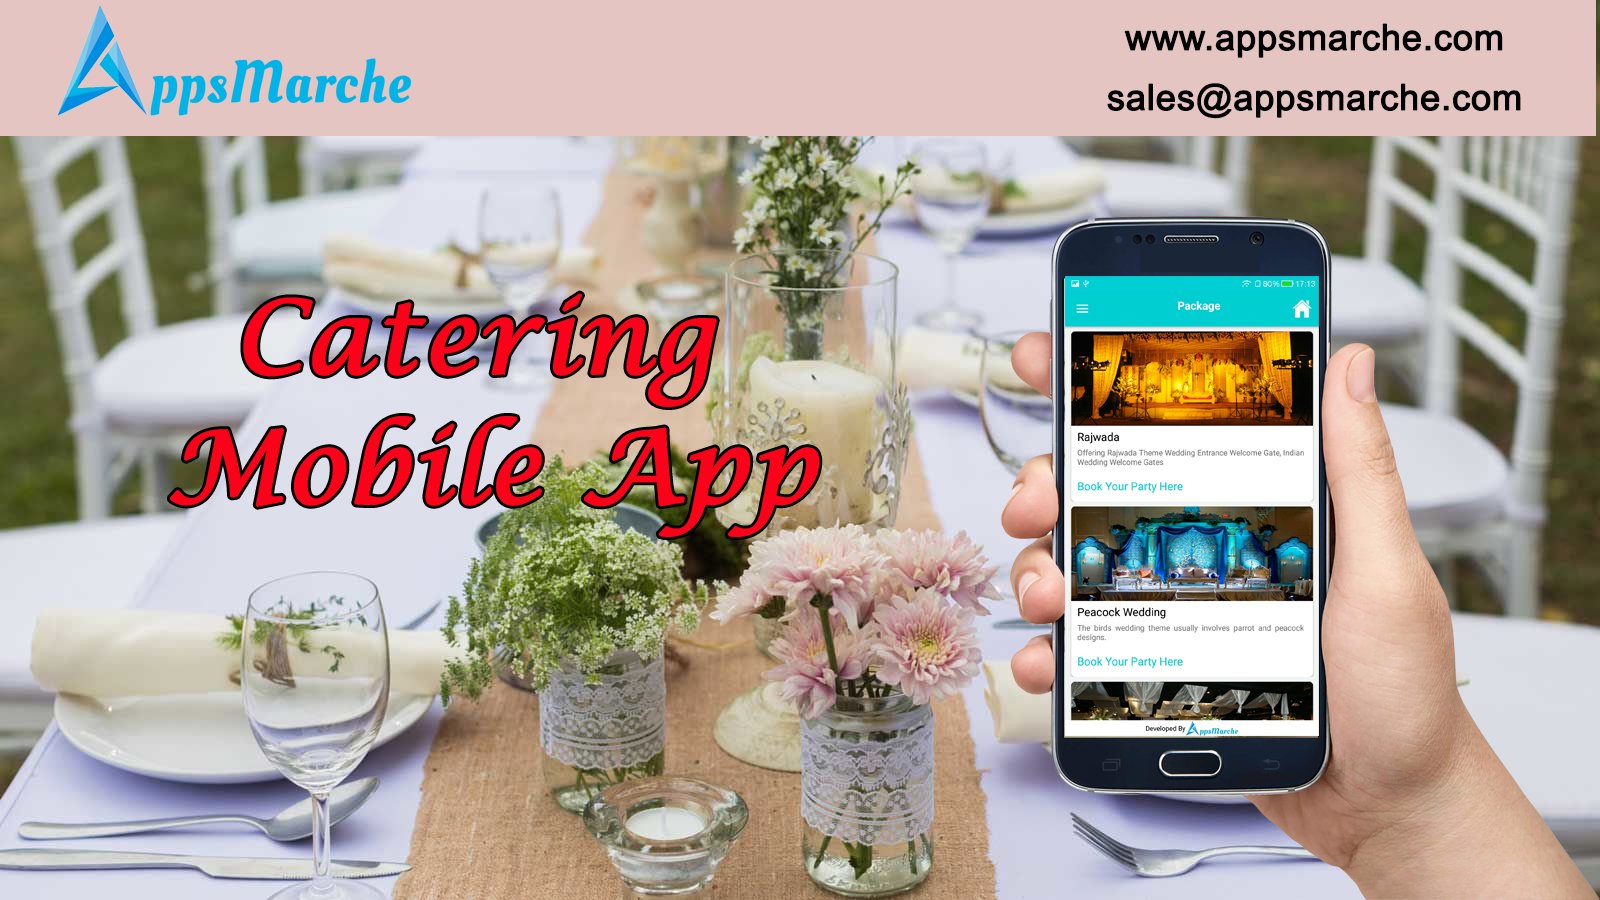 role of catering mobile app in your catering business, online caterers mobile app, best catering mobile app, catering services mobile app, top catering, Wedding Catering, mobile app builder, app builder, customized mobile apps